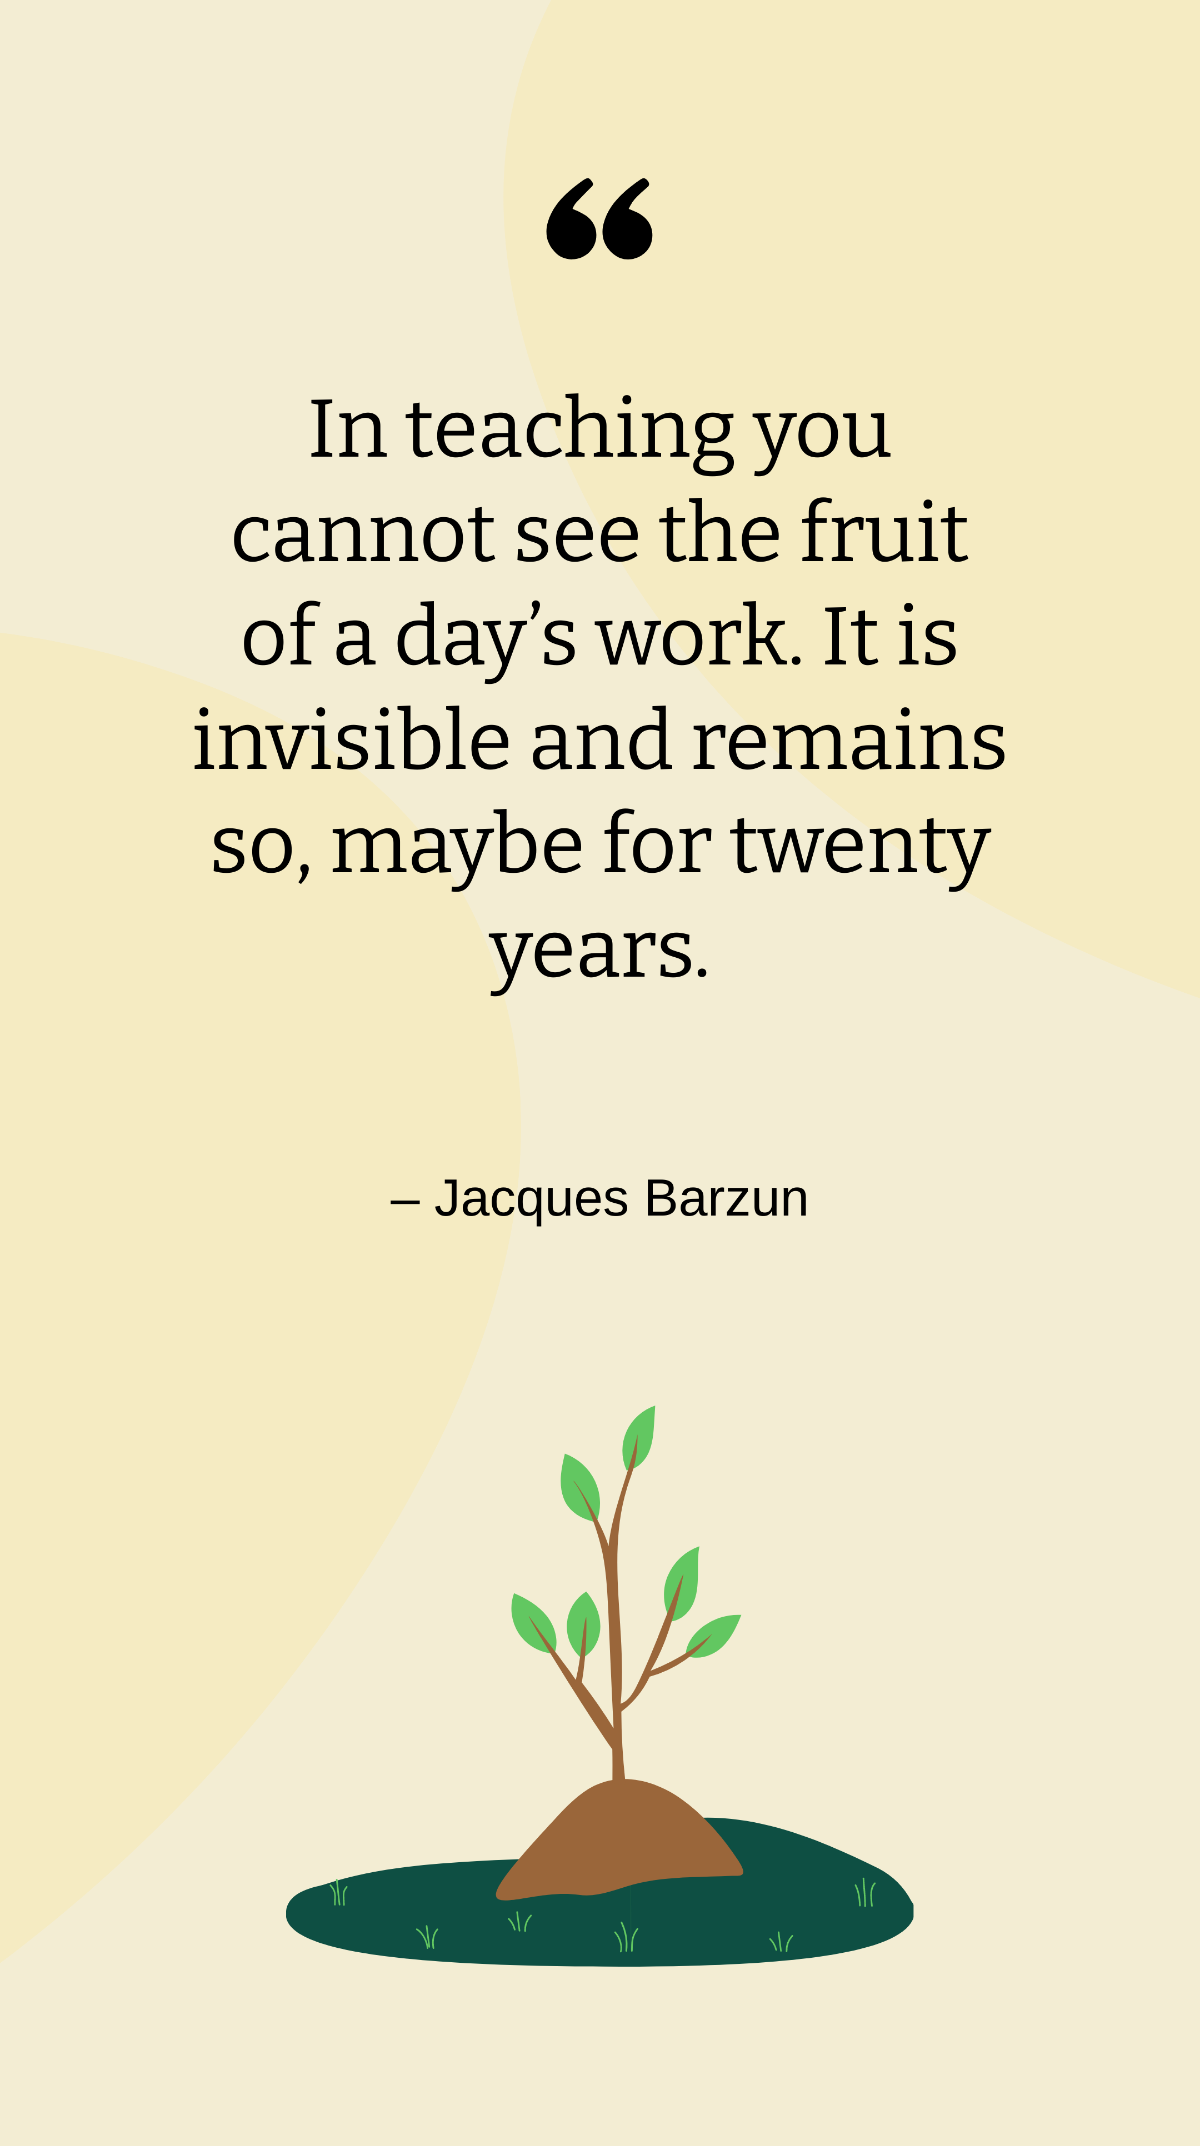 Jacques Barzun - In teaching you cannot see the fruit of a day’s work. It is invisible and remains so, maybe for twenty years.